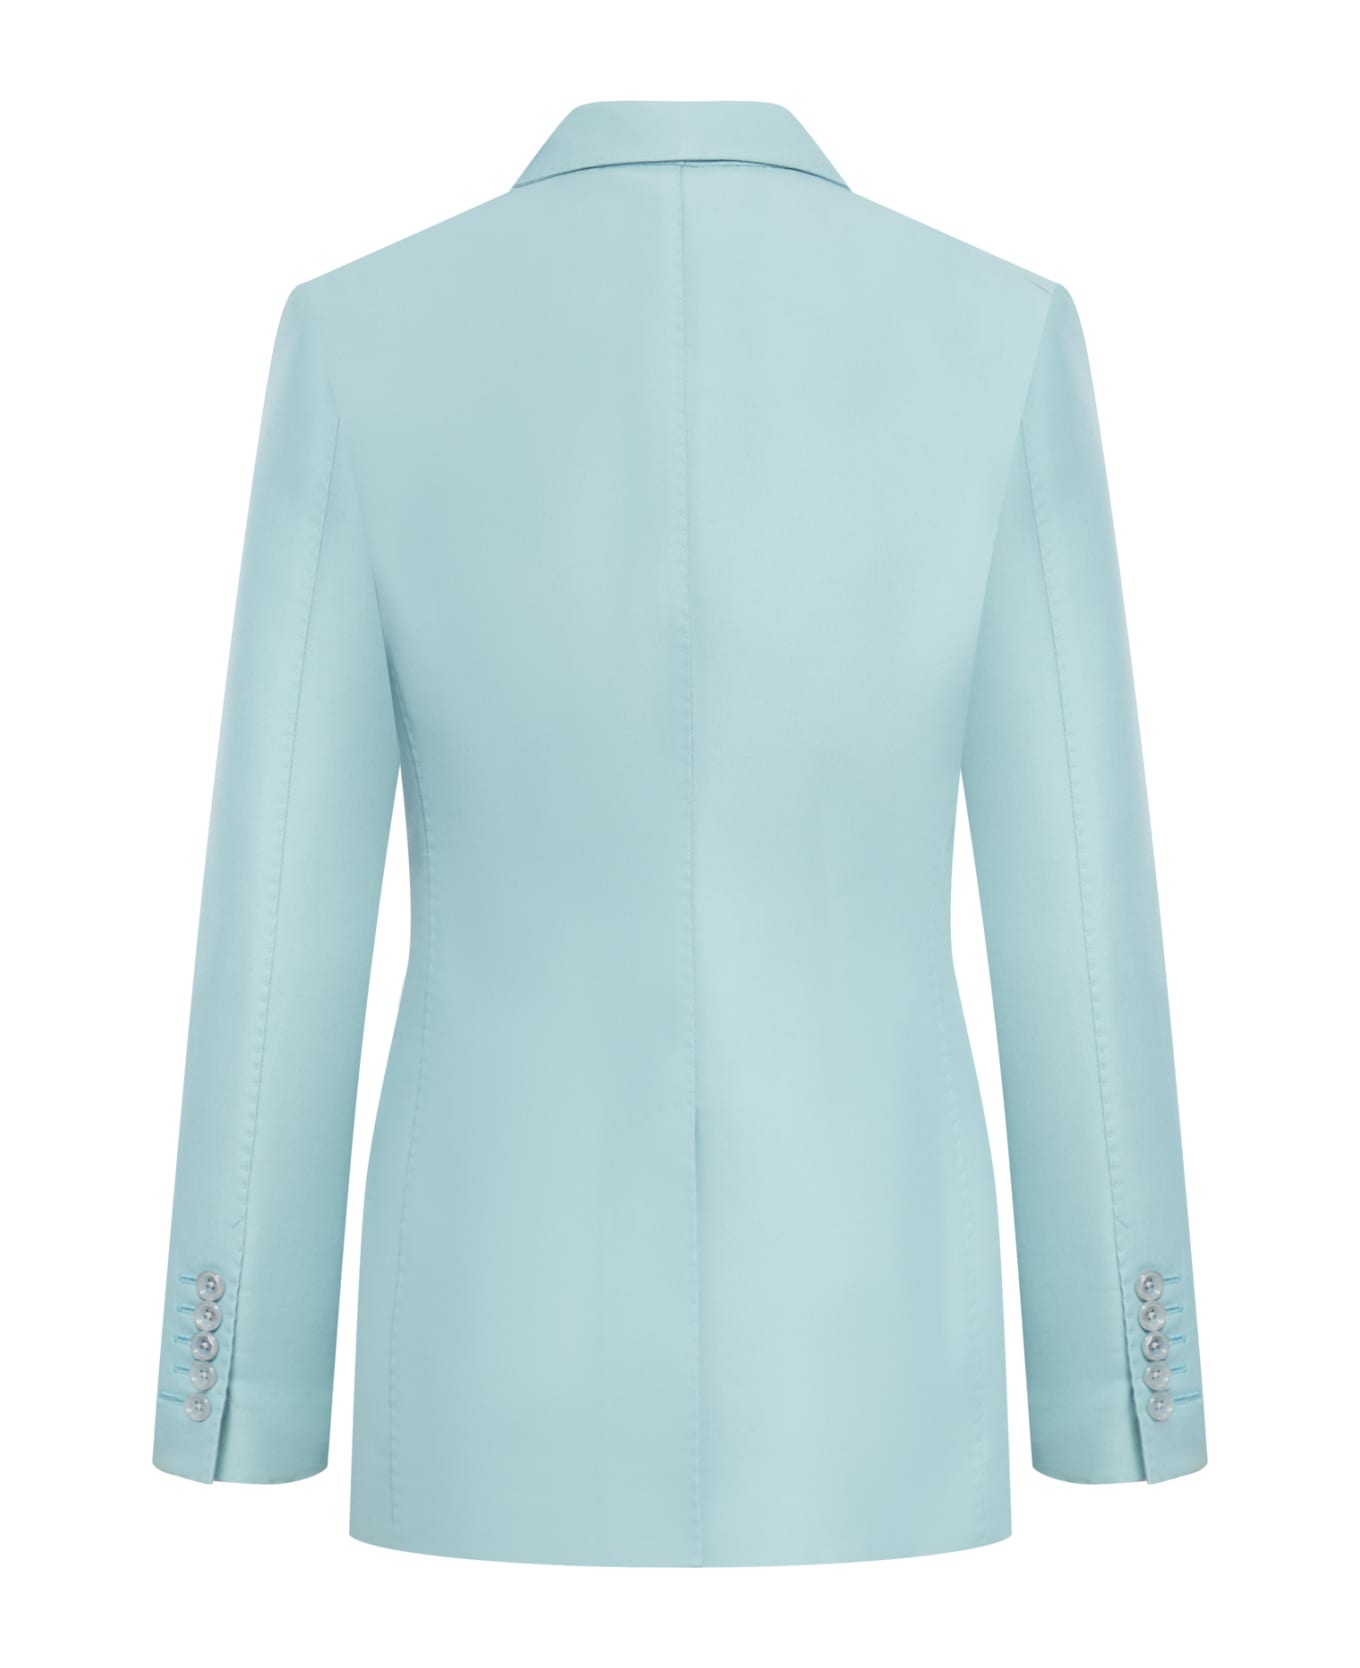 Tom Ford Compact Hopsack Wool Blend Double Breasted Jacket - Light Turquoise